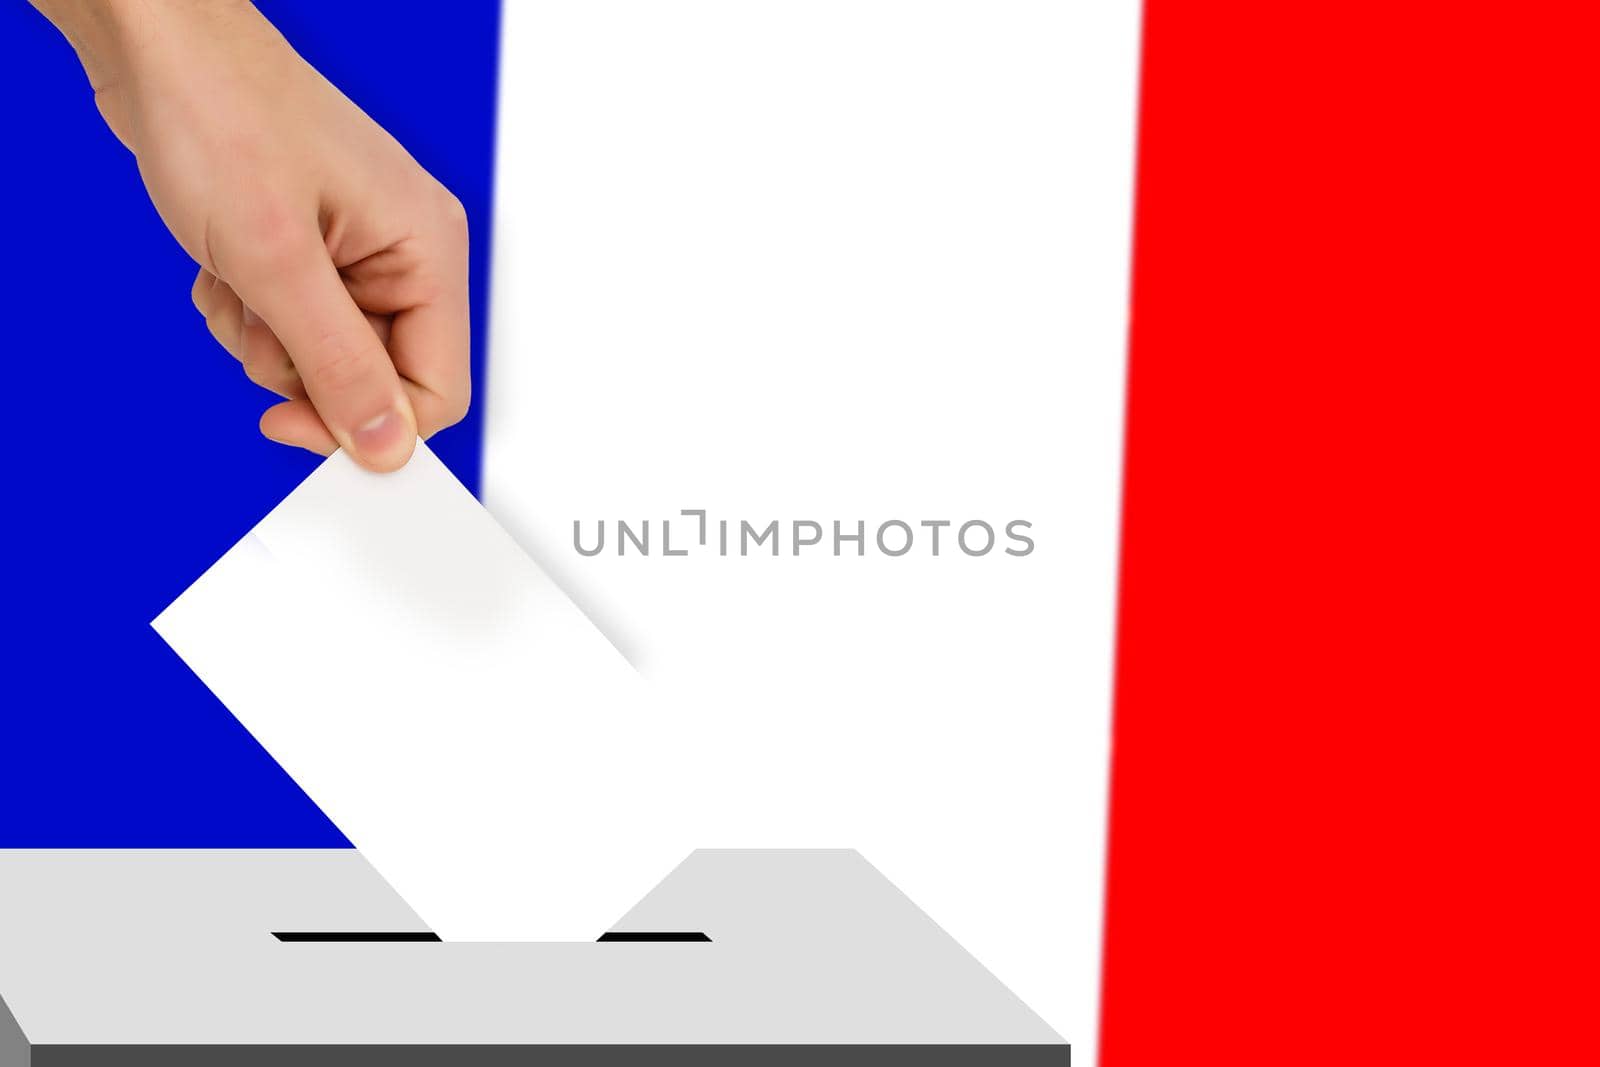 hand drops the ballot election against the background of the flag, concept of state elections, referendum